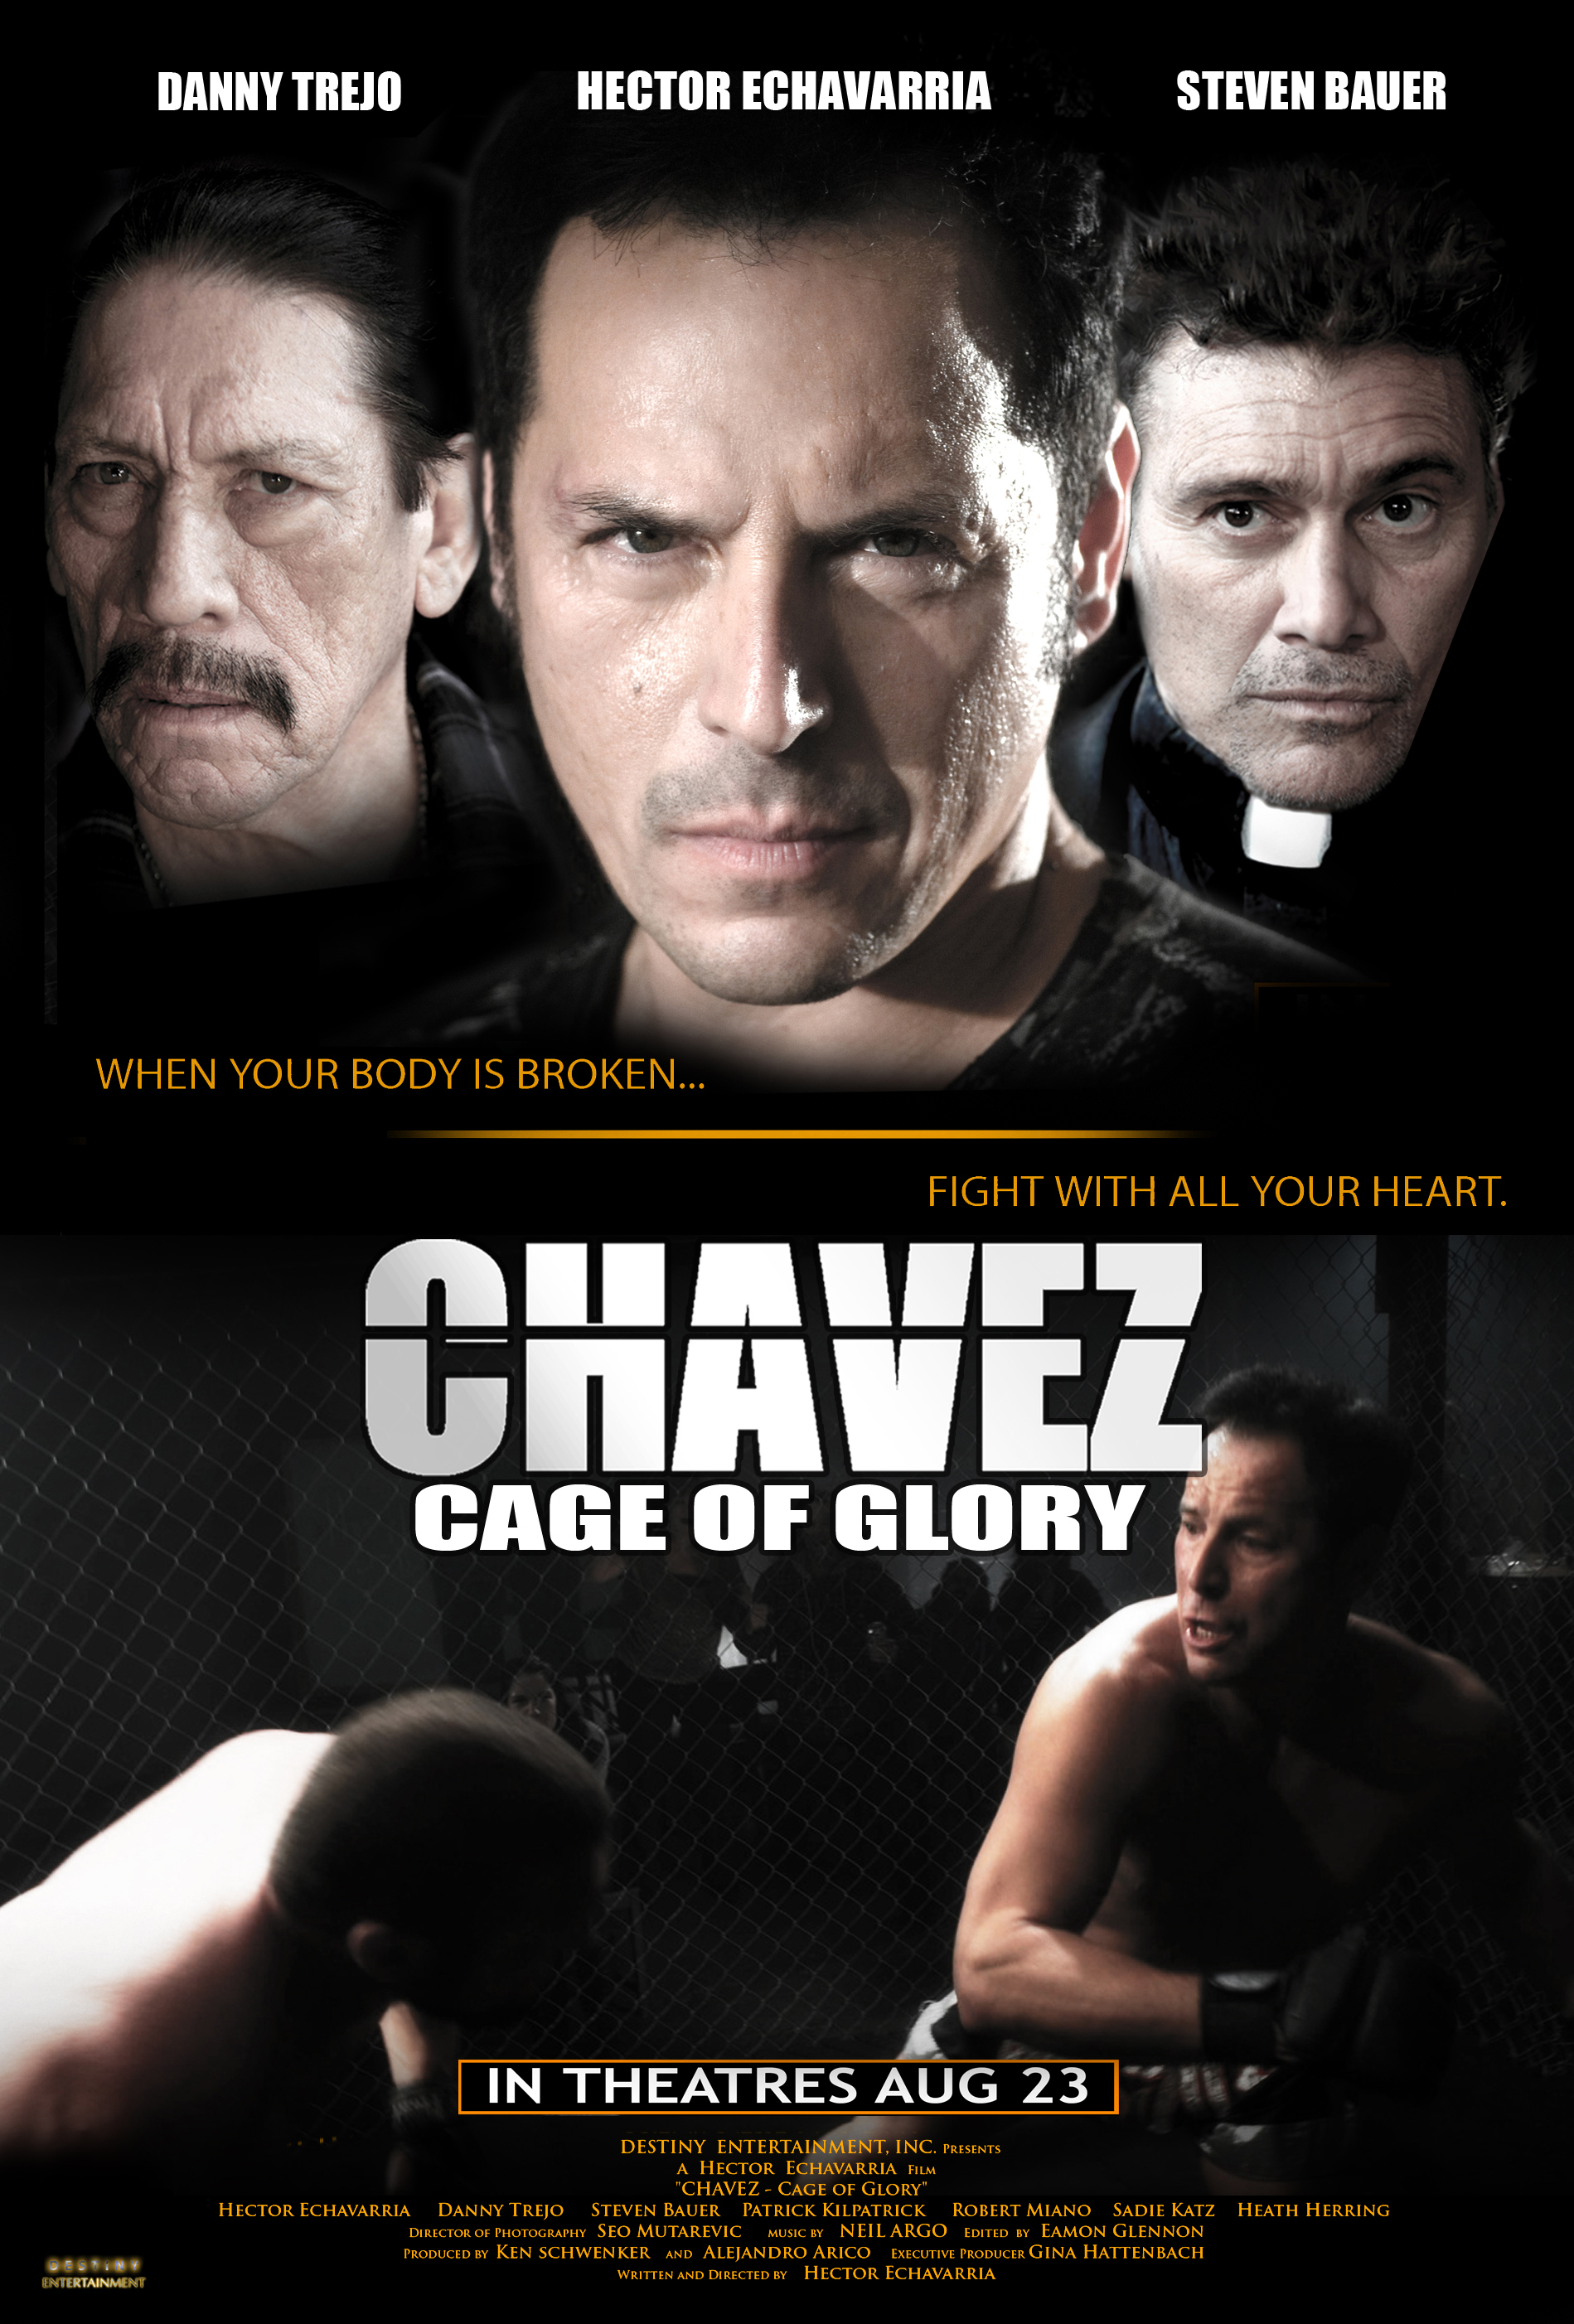 Hector Echavarria's movie poster of Chavez Cage of Glory